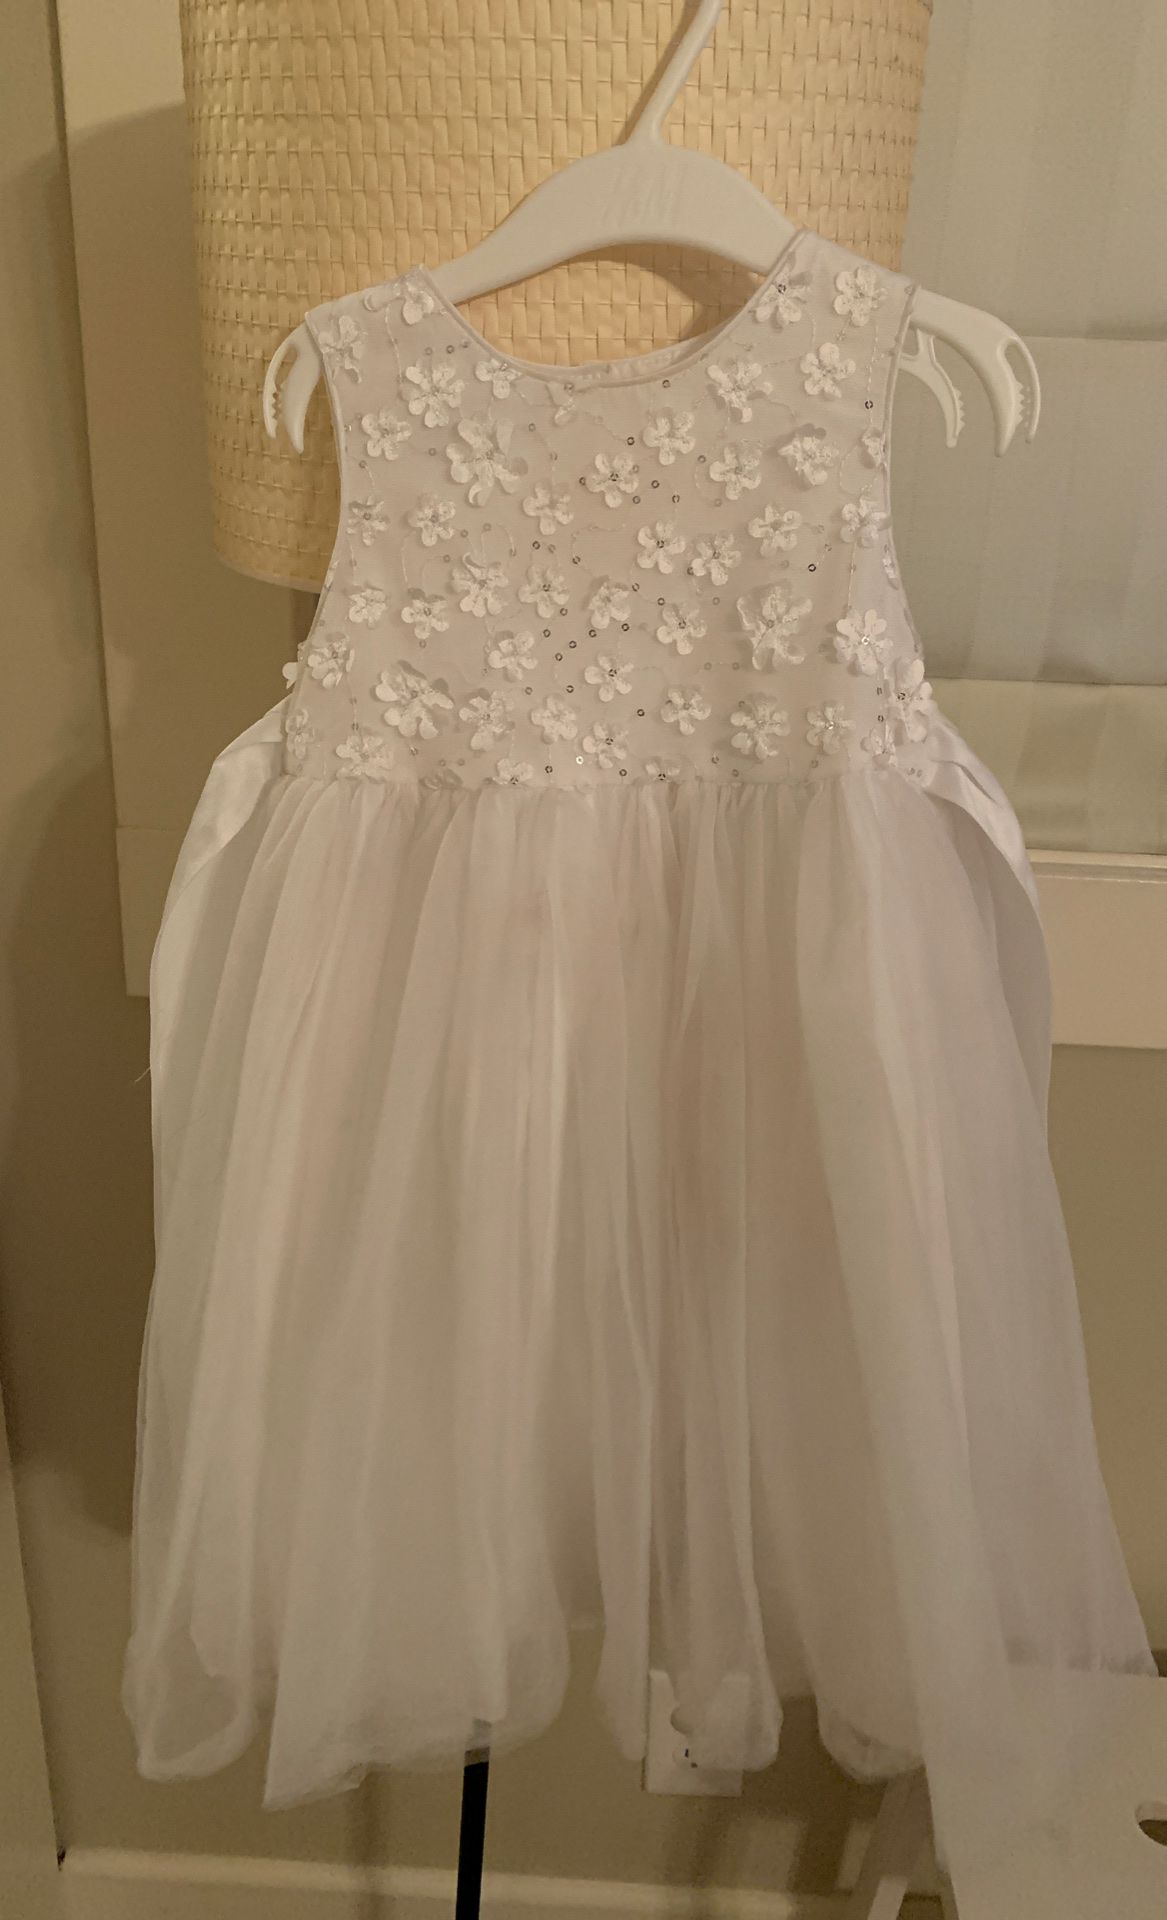 3T flower girl dress excellent condition!